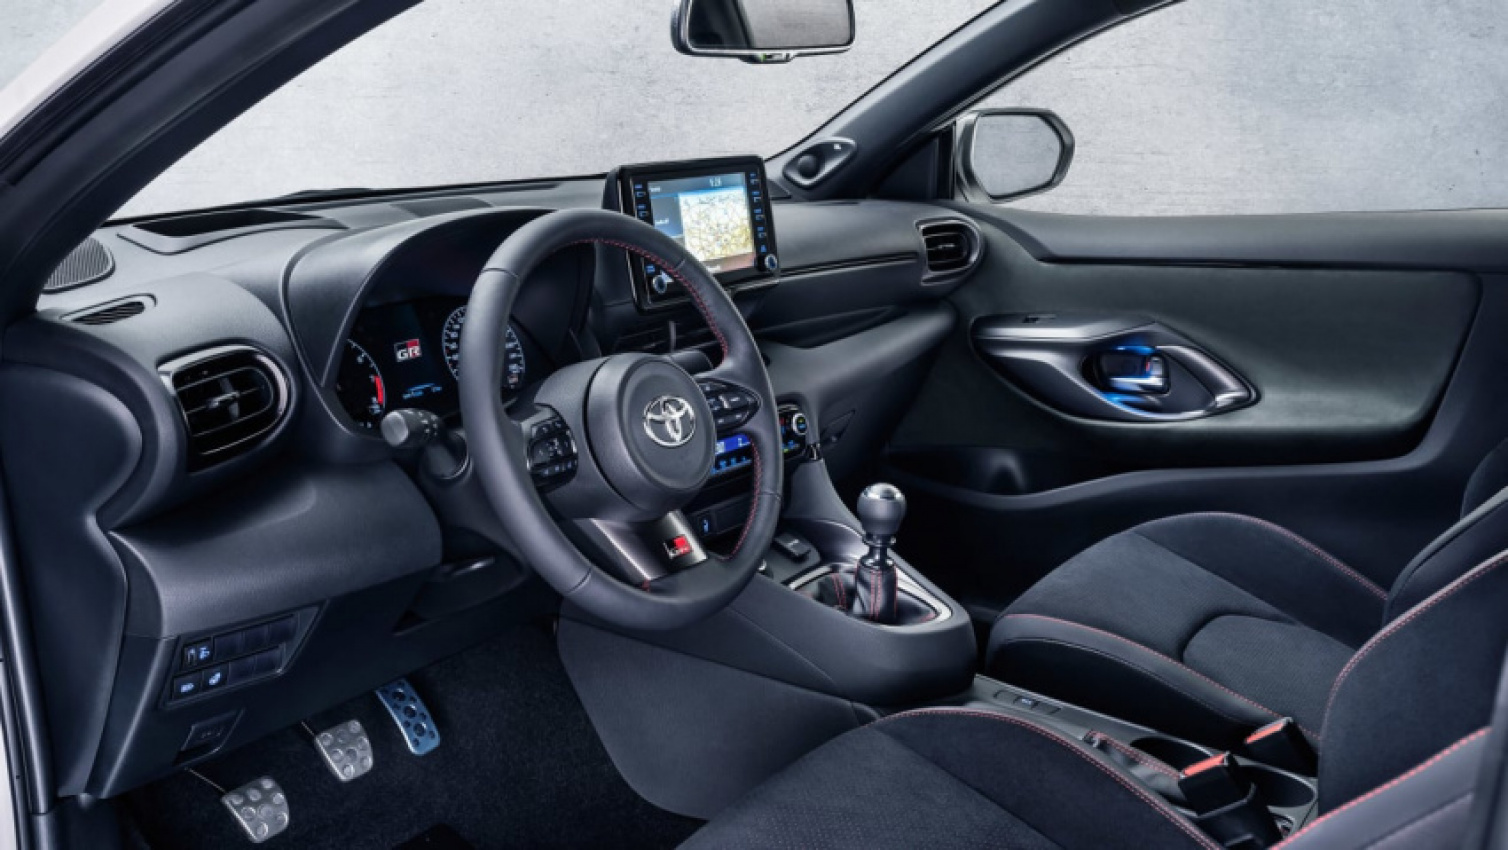 autos, cars, reviews, toyota, gr yaris, hot hatches, yaris, yaris grmn hatchback, toyota gr yaris set to gain an automatic gearbox option